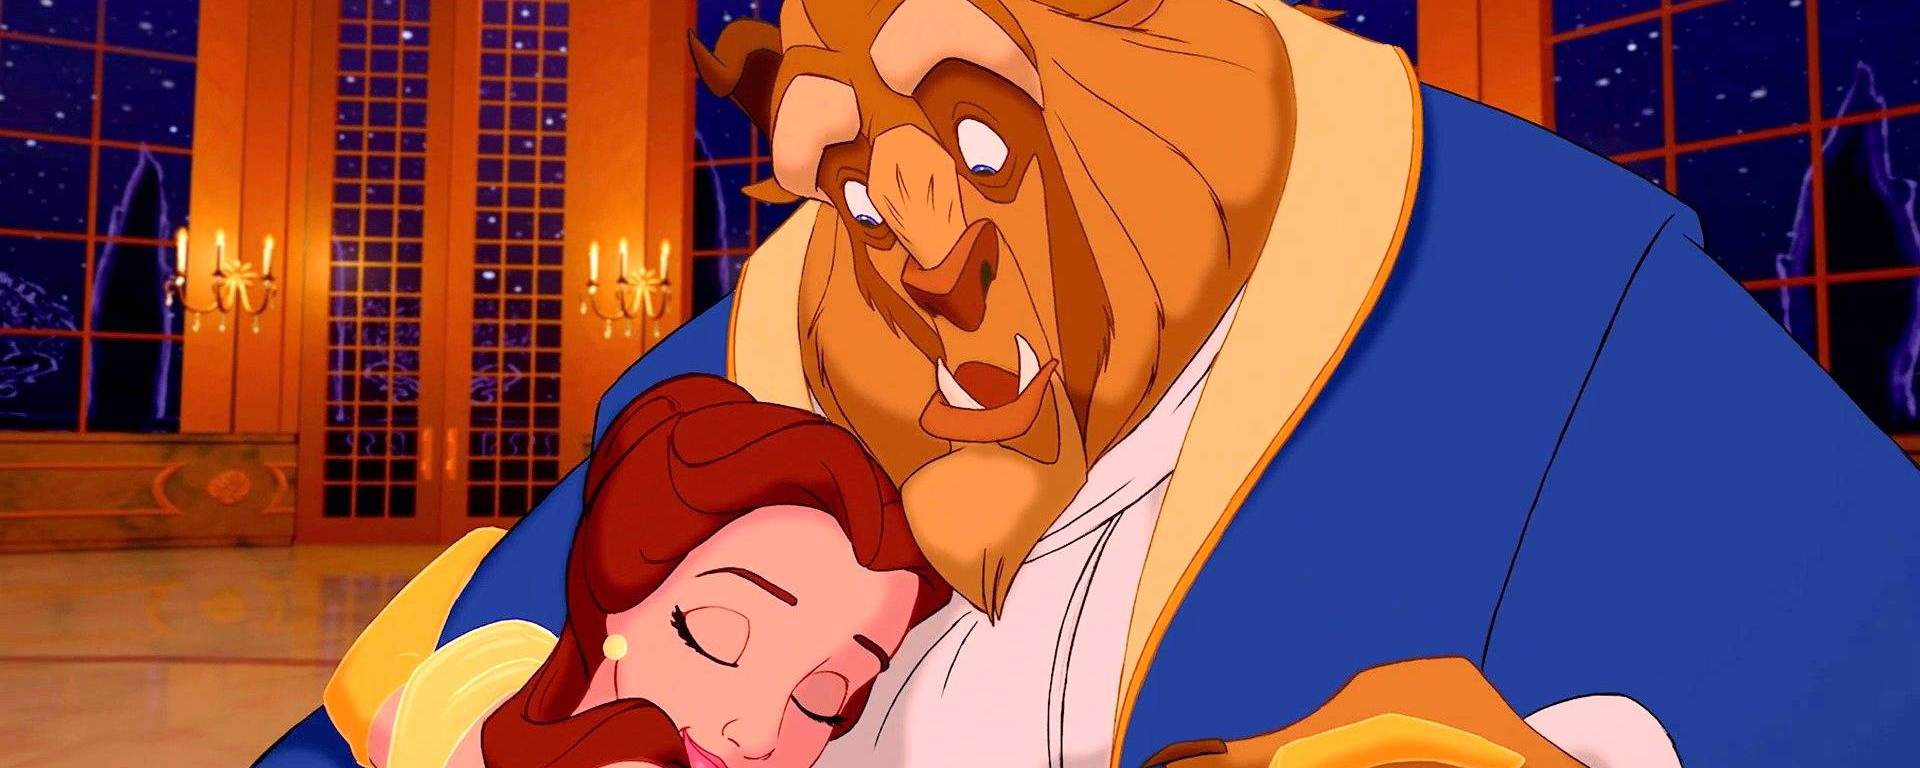 Beauty and the Beast (1991) Review – The Great Movie Debate